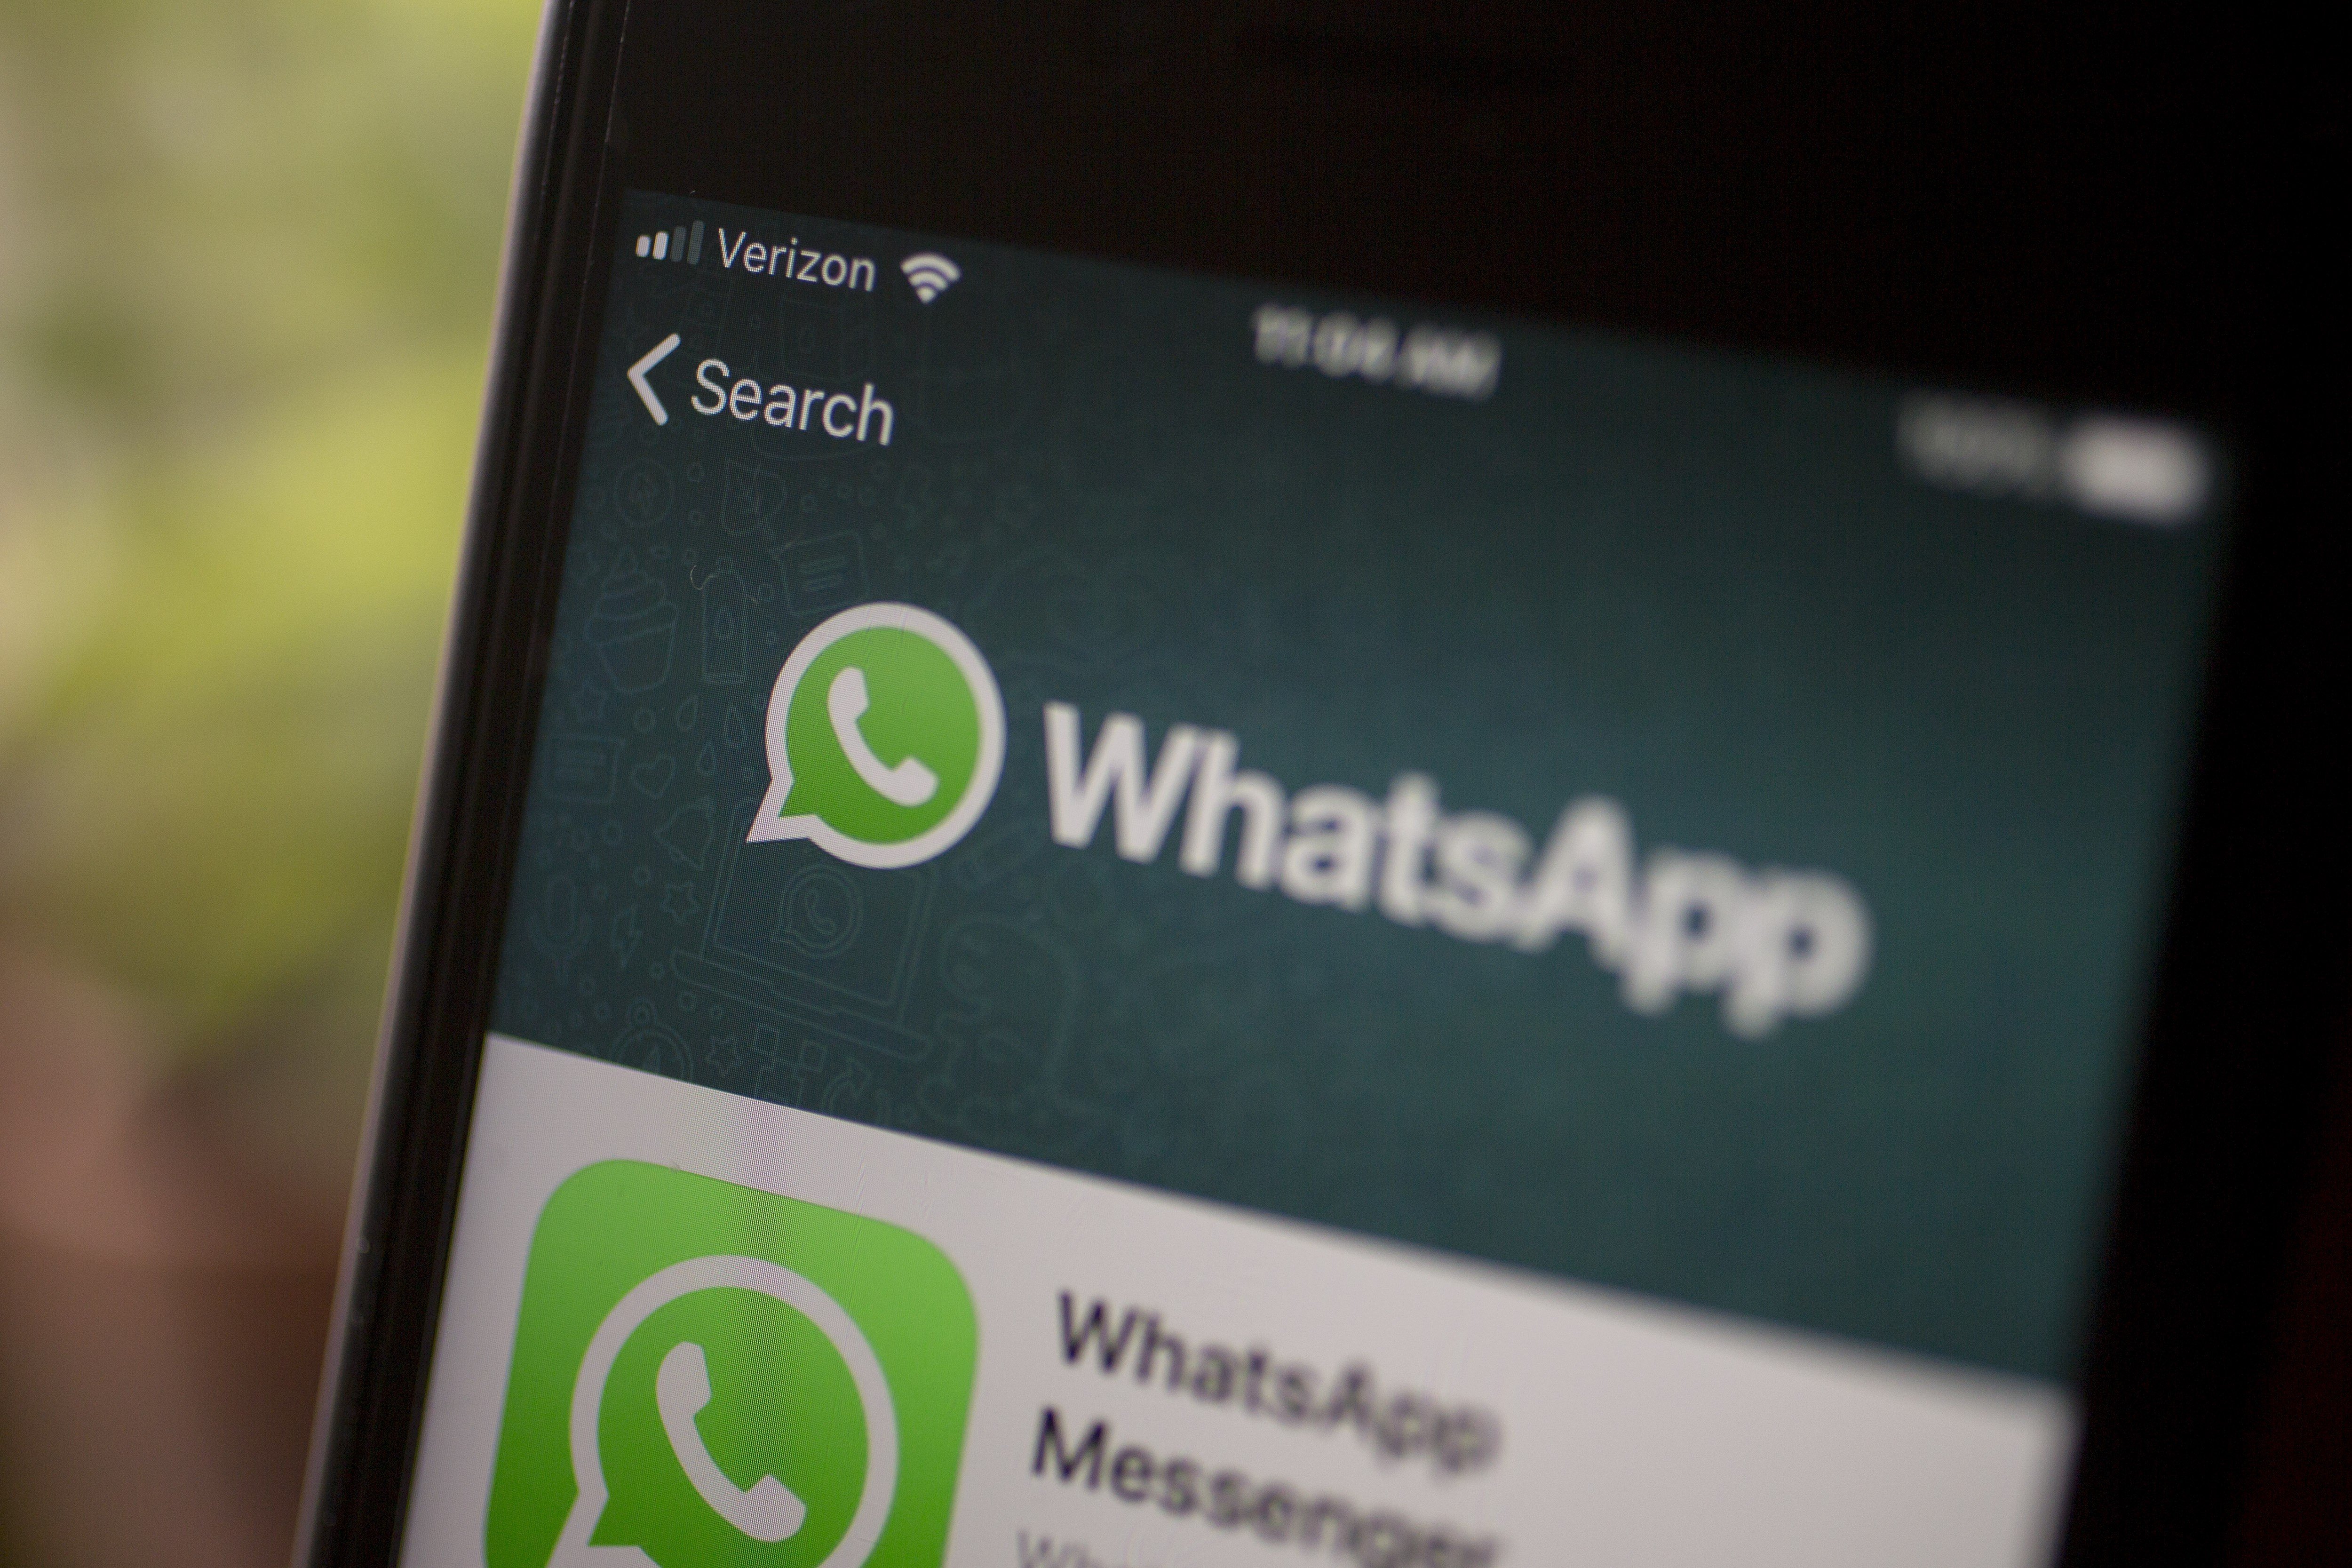 Whatsapp Urges Users To Upgrade After Finding Israeli Spyware - whatsapp urges users to upgrade after finding israeli spyware vulnerability south china morning post